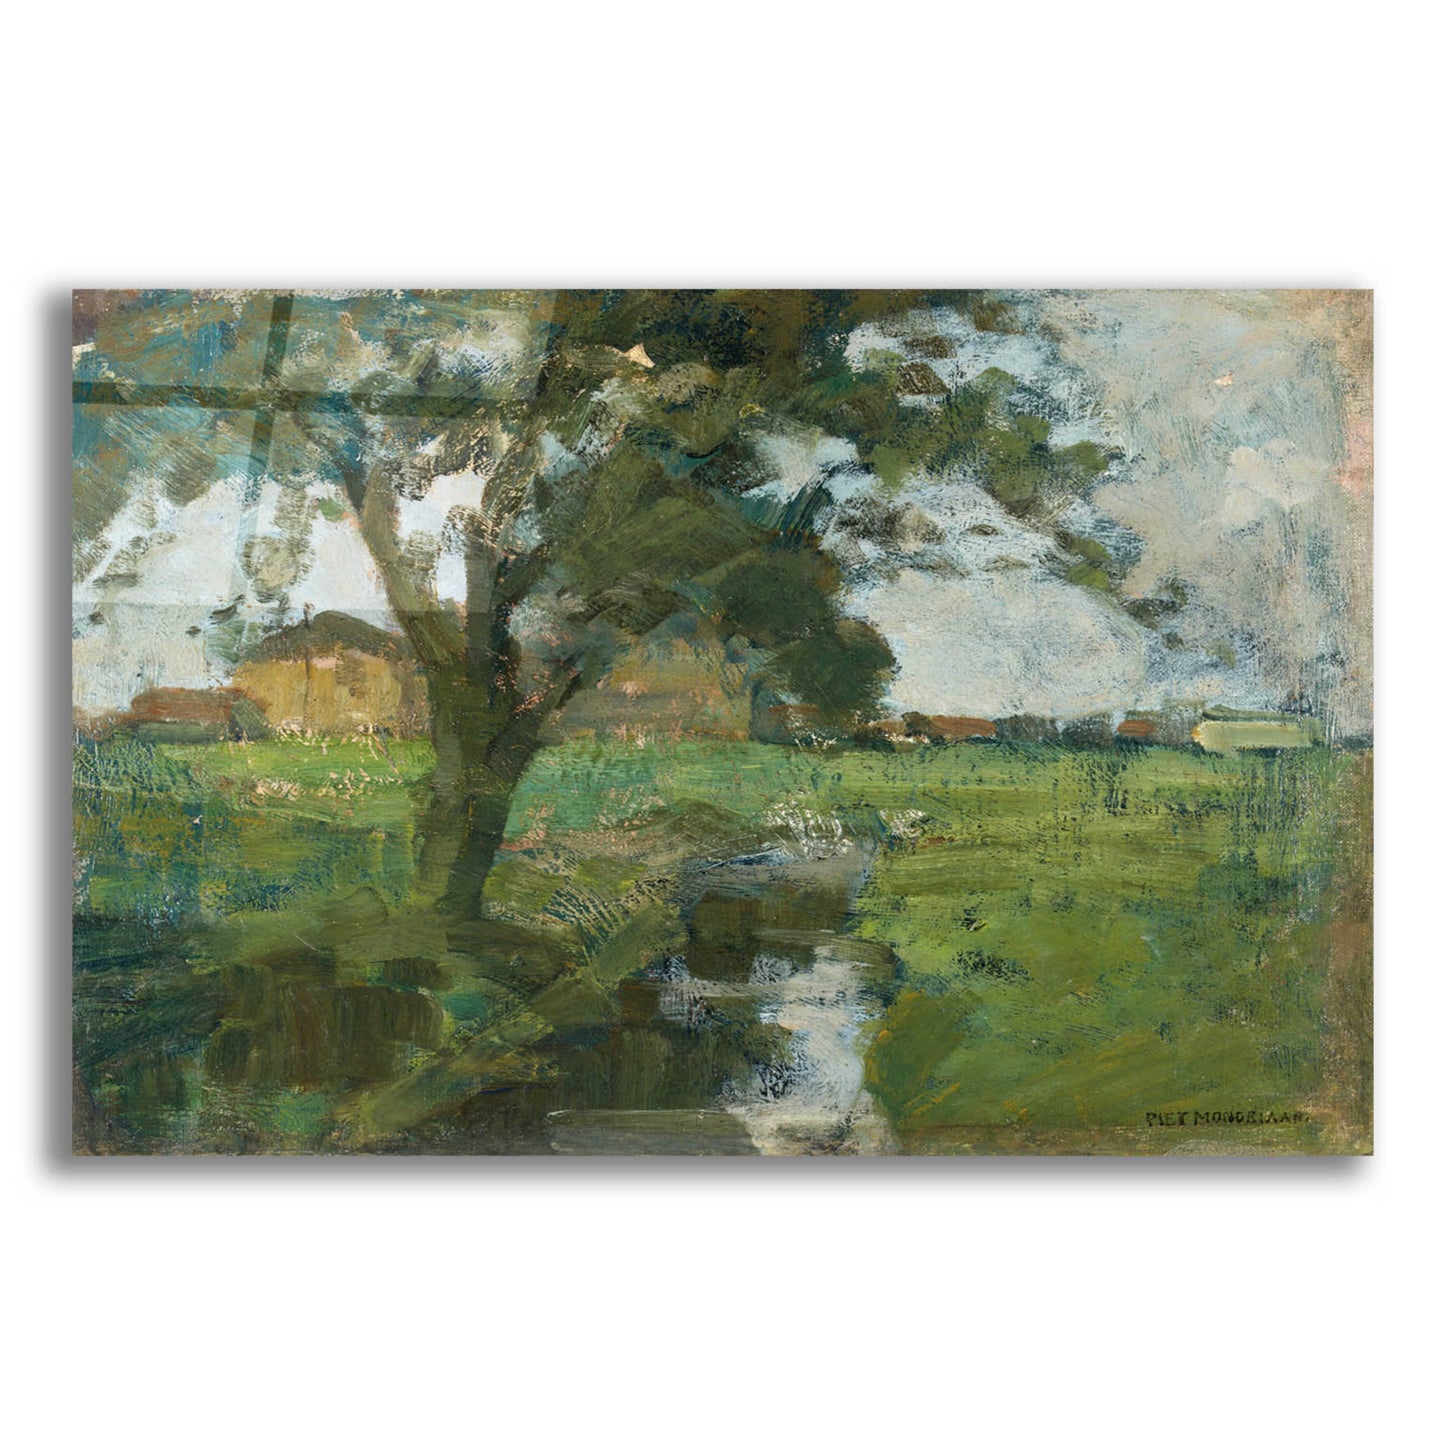 Epic Art 'Farm Settin with Foreground tree and Irrigation Ditch, 1900' by Piet Mondrian, Acrylic Glass Wall Art,16x12